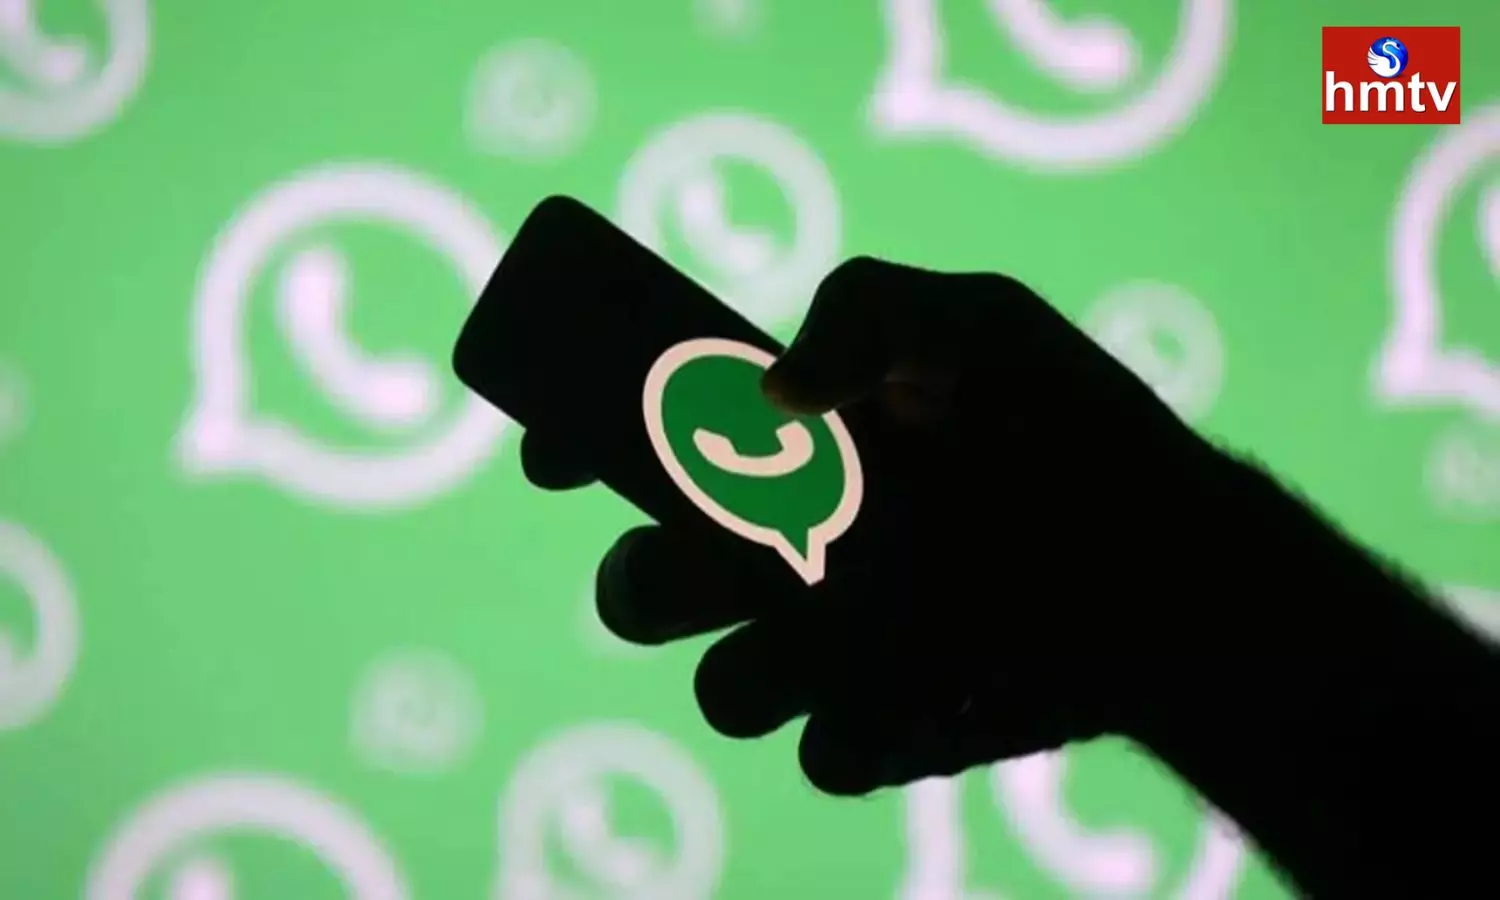 If you do these mistakes in WhatsApp your account will be banned